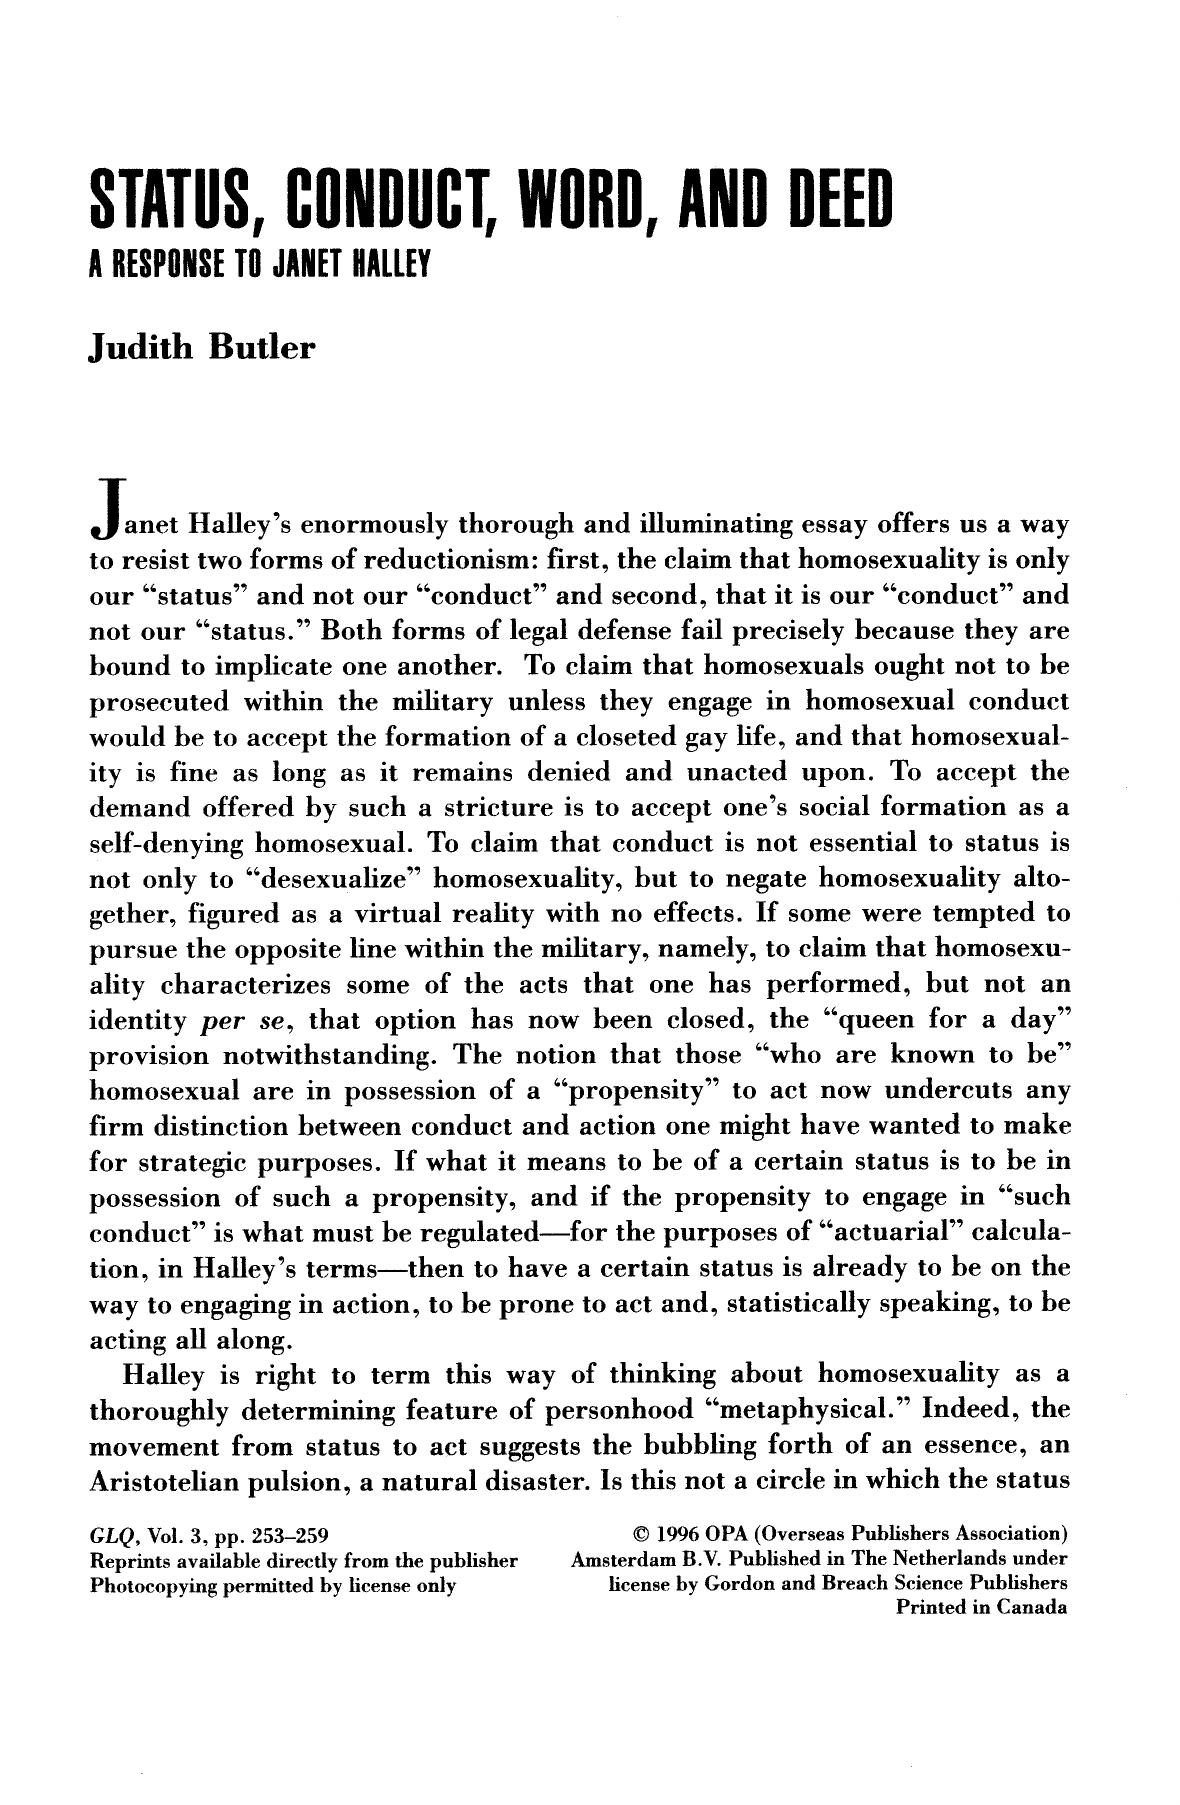 Status, Conduct, Word, and Deed - A Response to Janet Halley [Essay]